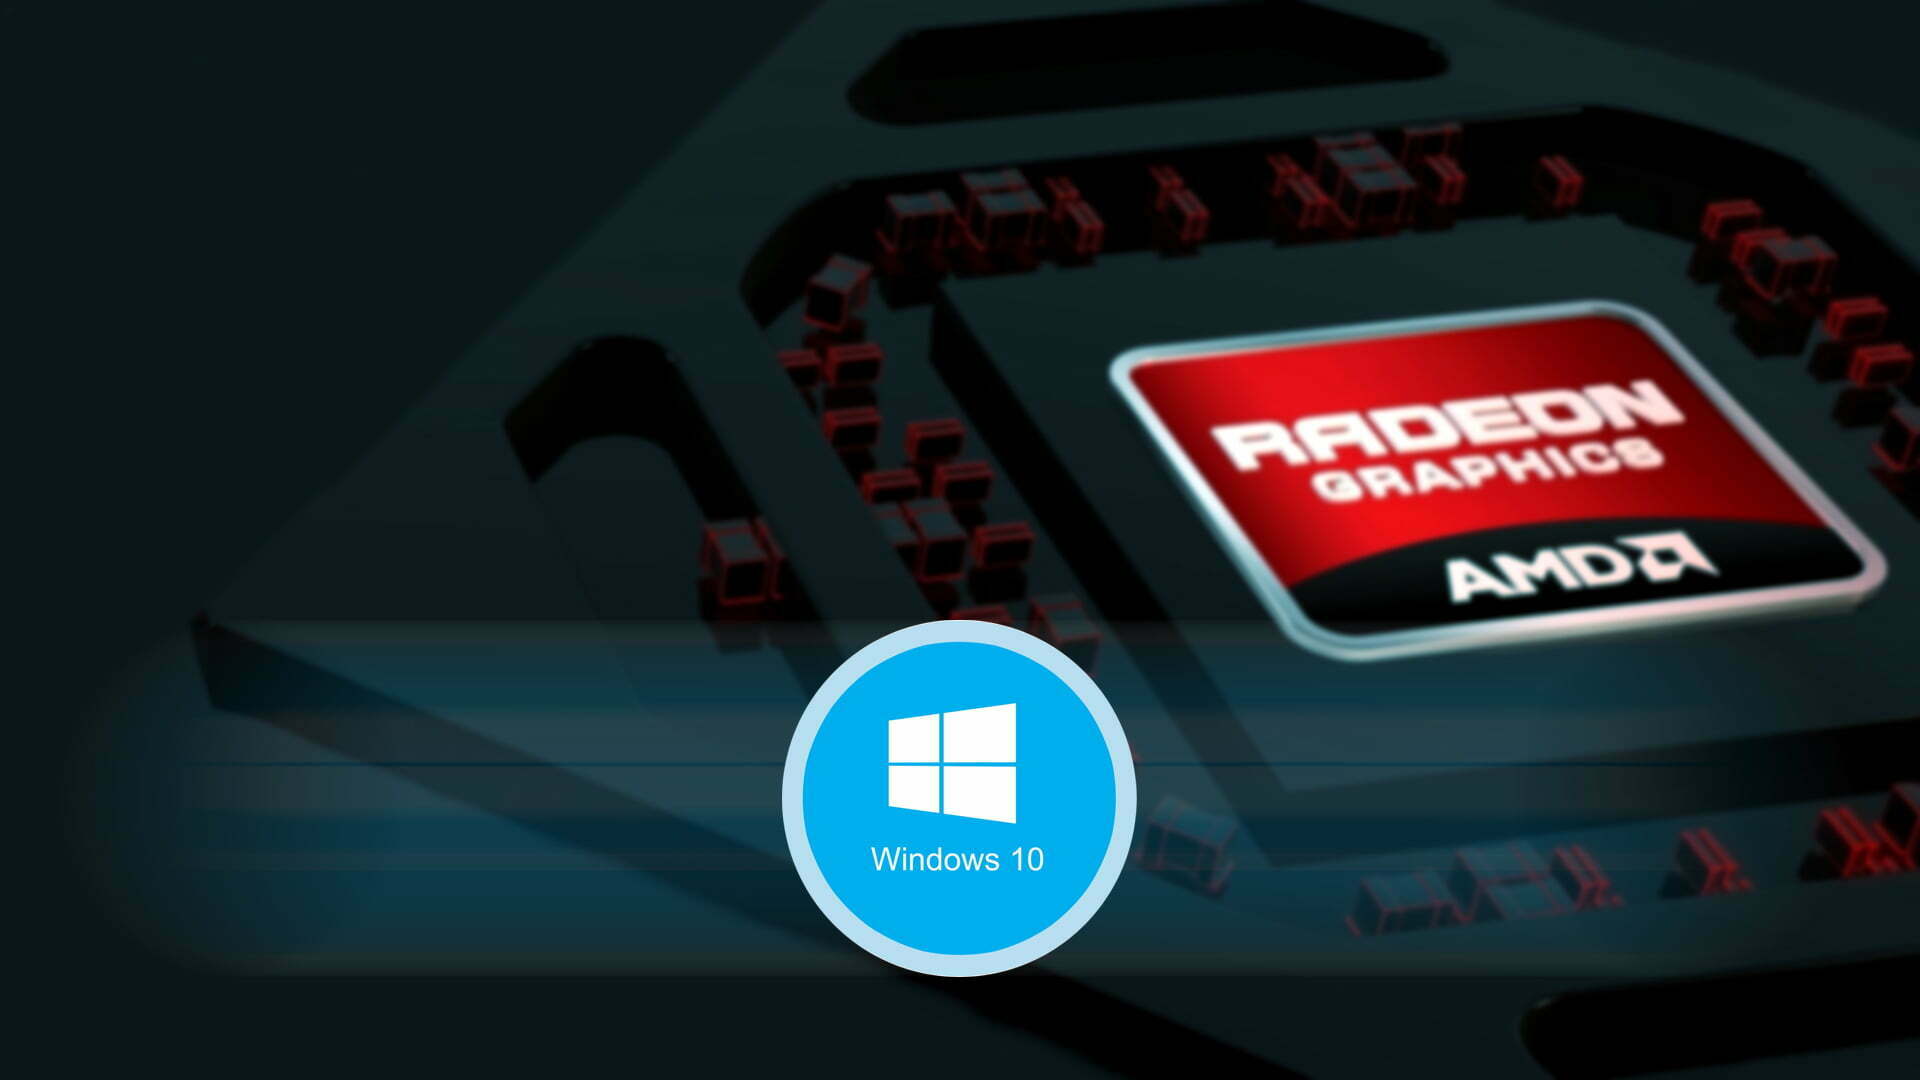 Install AMD Graphic Card Drivers on Windows 10 PC